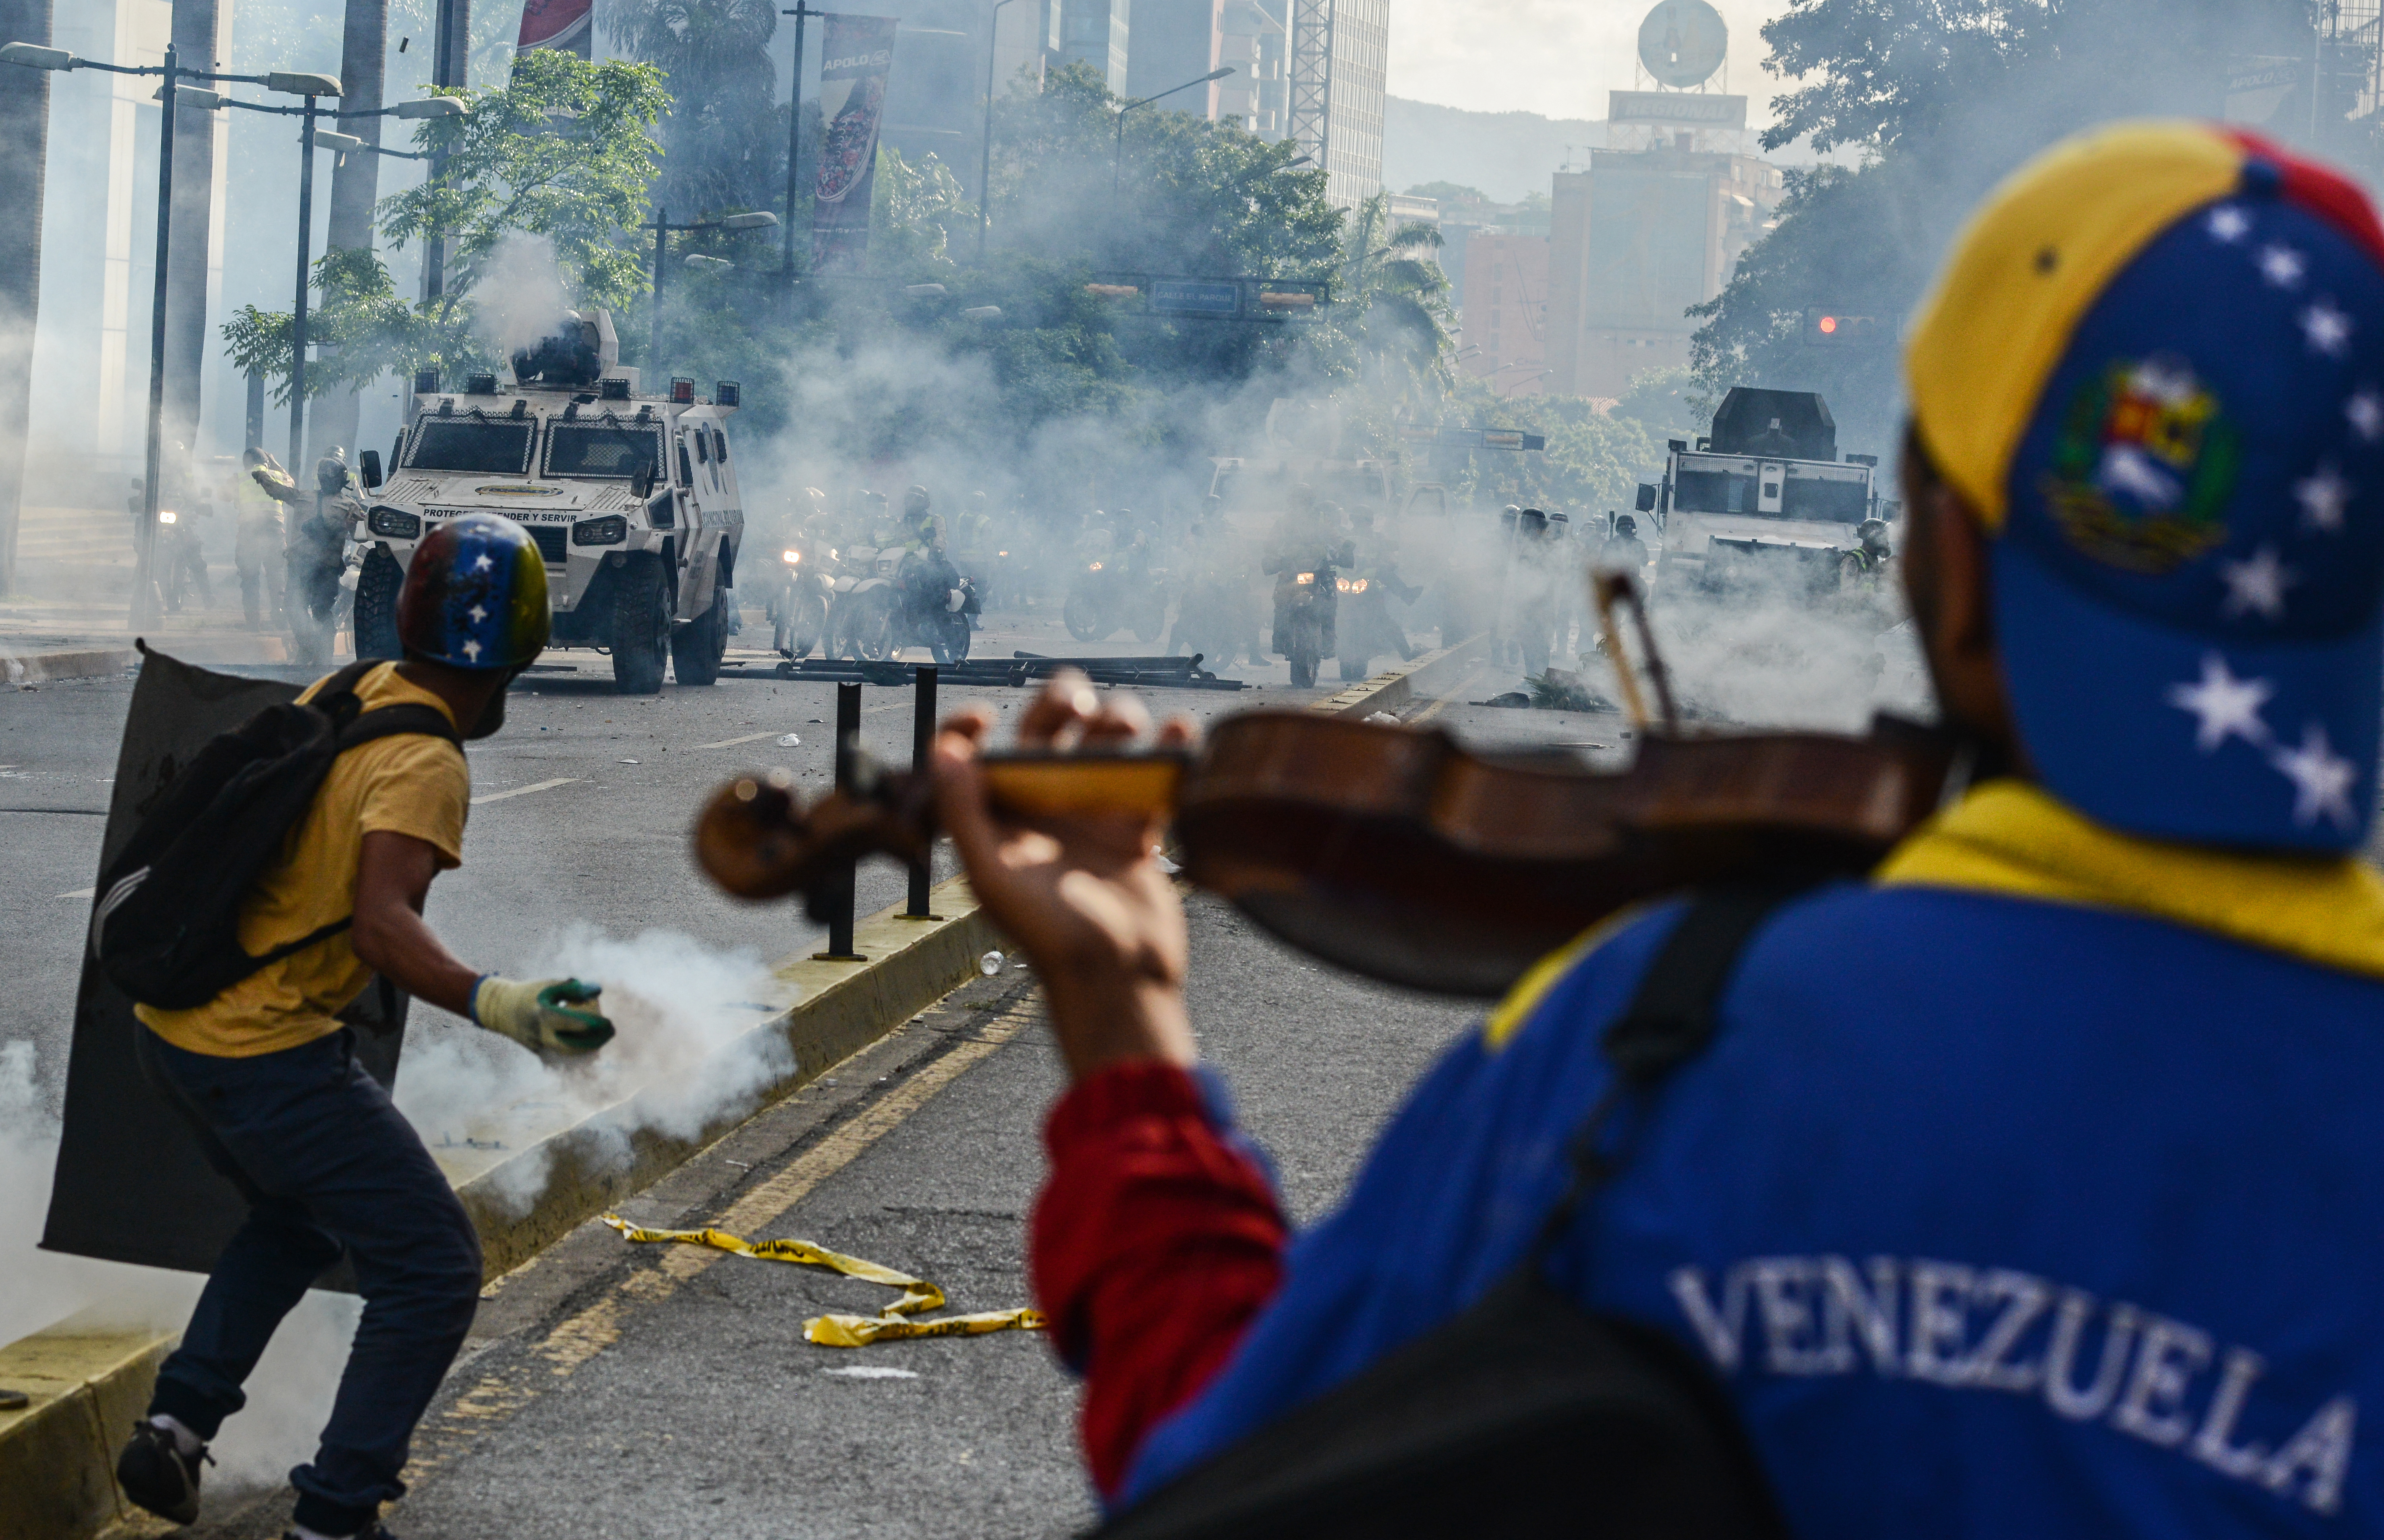 Opposition activists clash with riot police during a protest against the government of President Nicolas Maduro in Caracas on May 20, 2017..Venezuelan protesters and